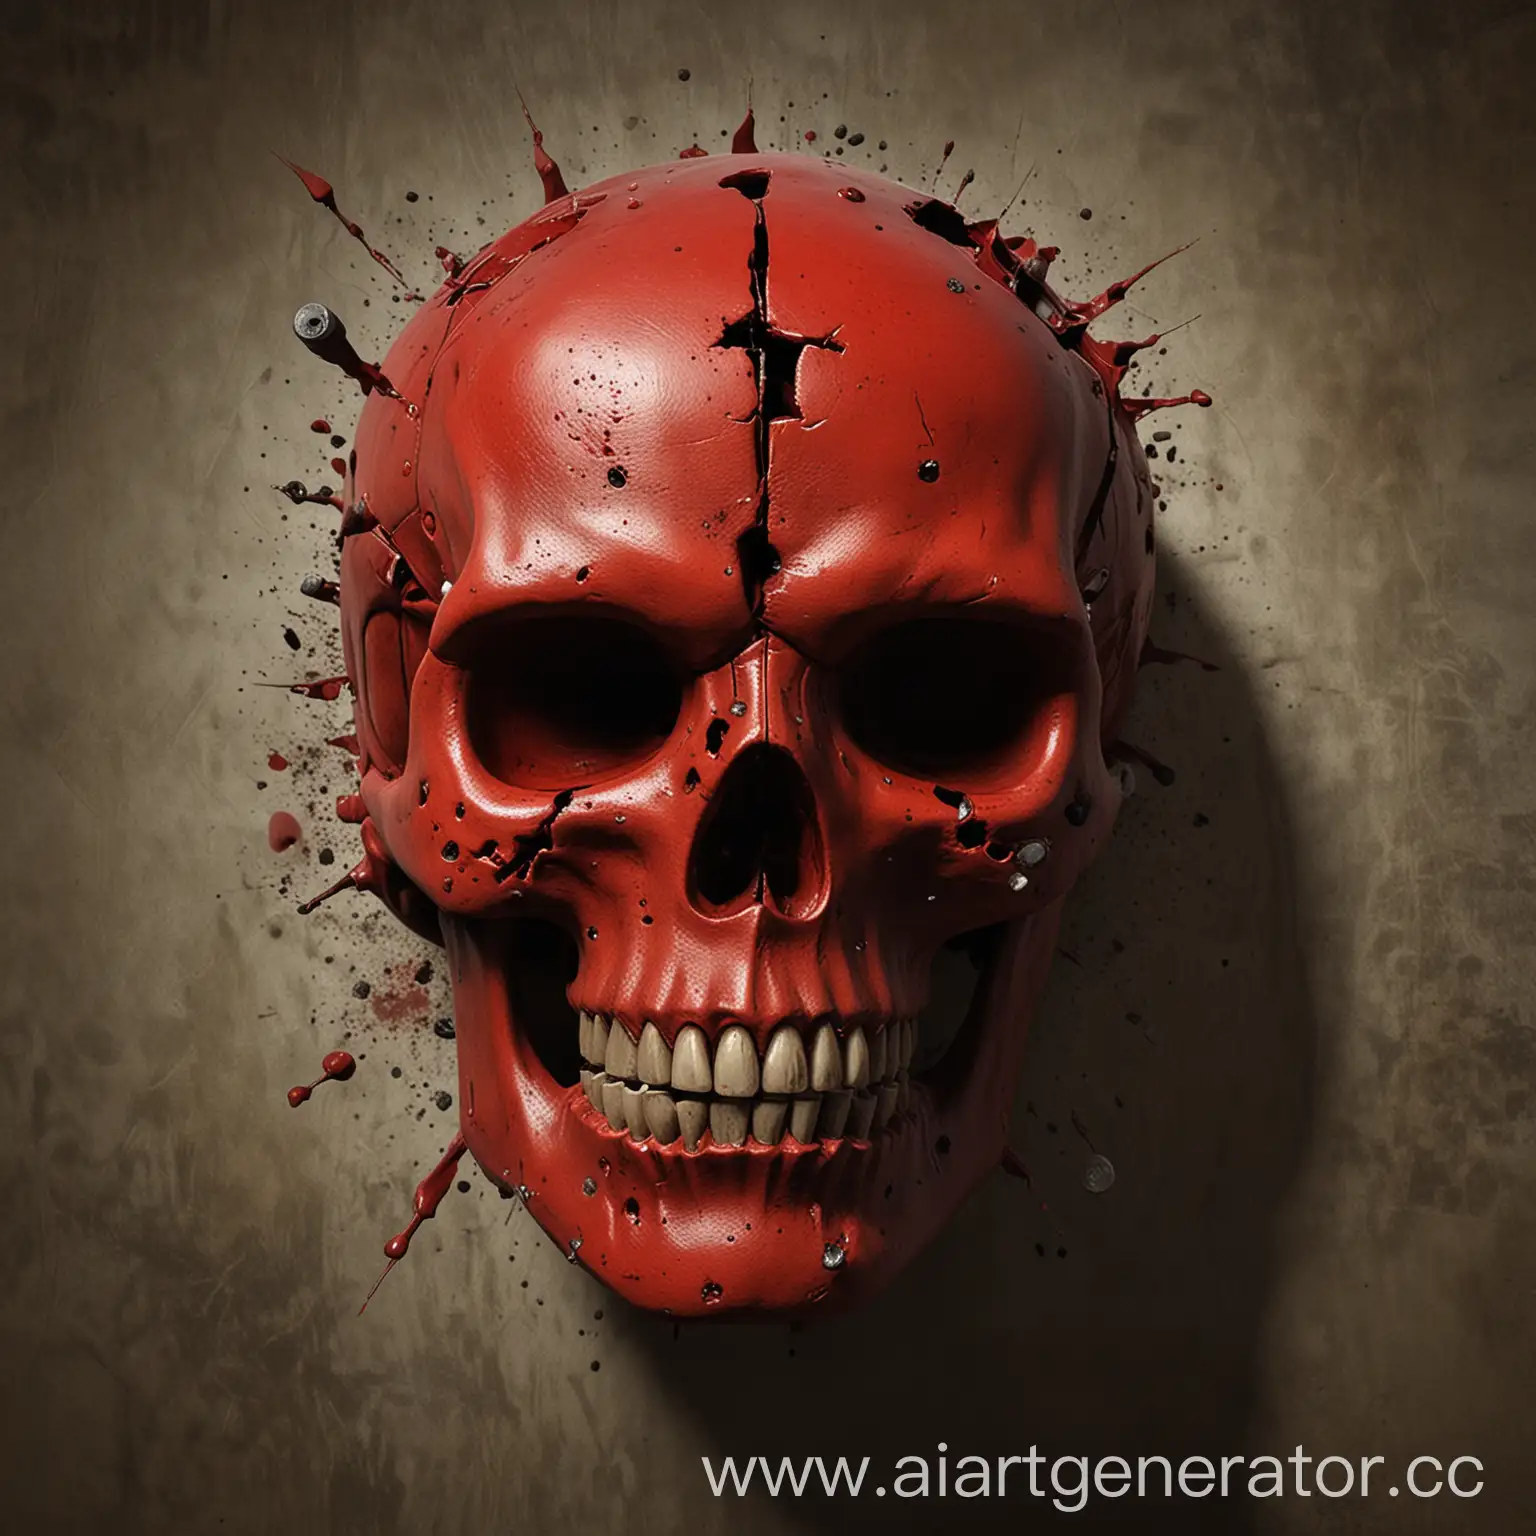 Eerie-Red-Skull-with-Bullet-Wound-Dark-and-Foreboding-Art-Piece